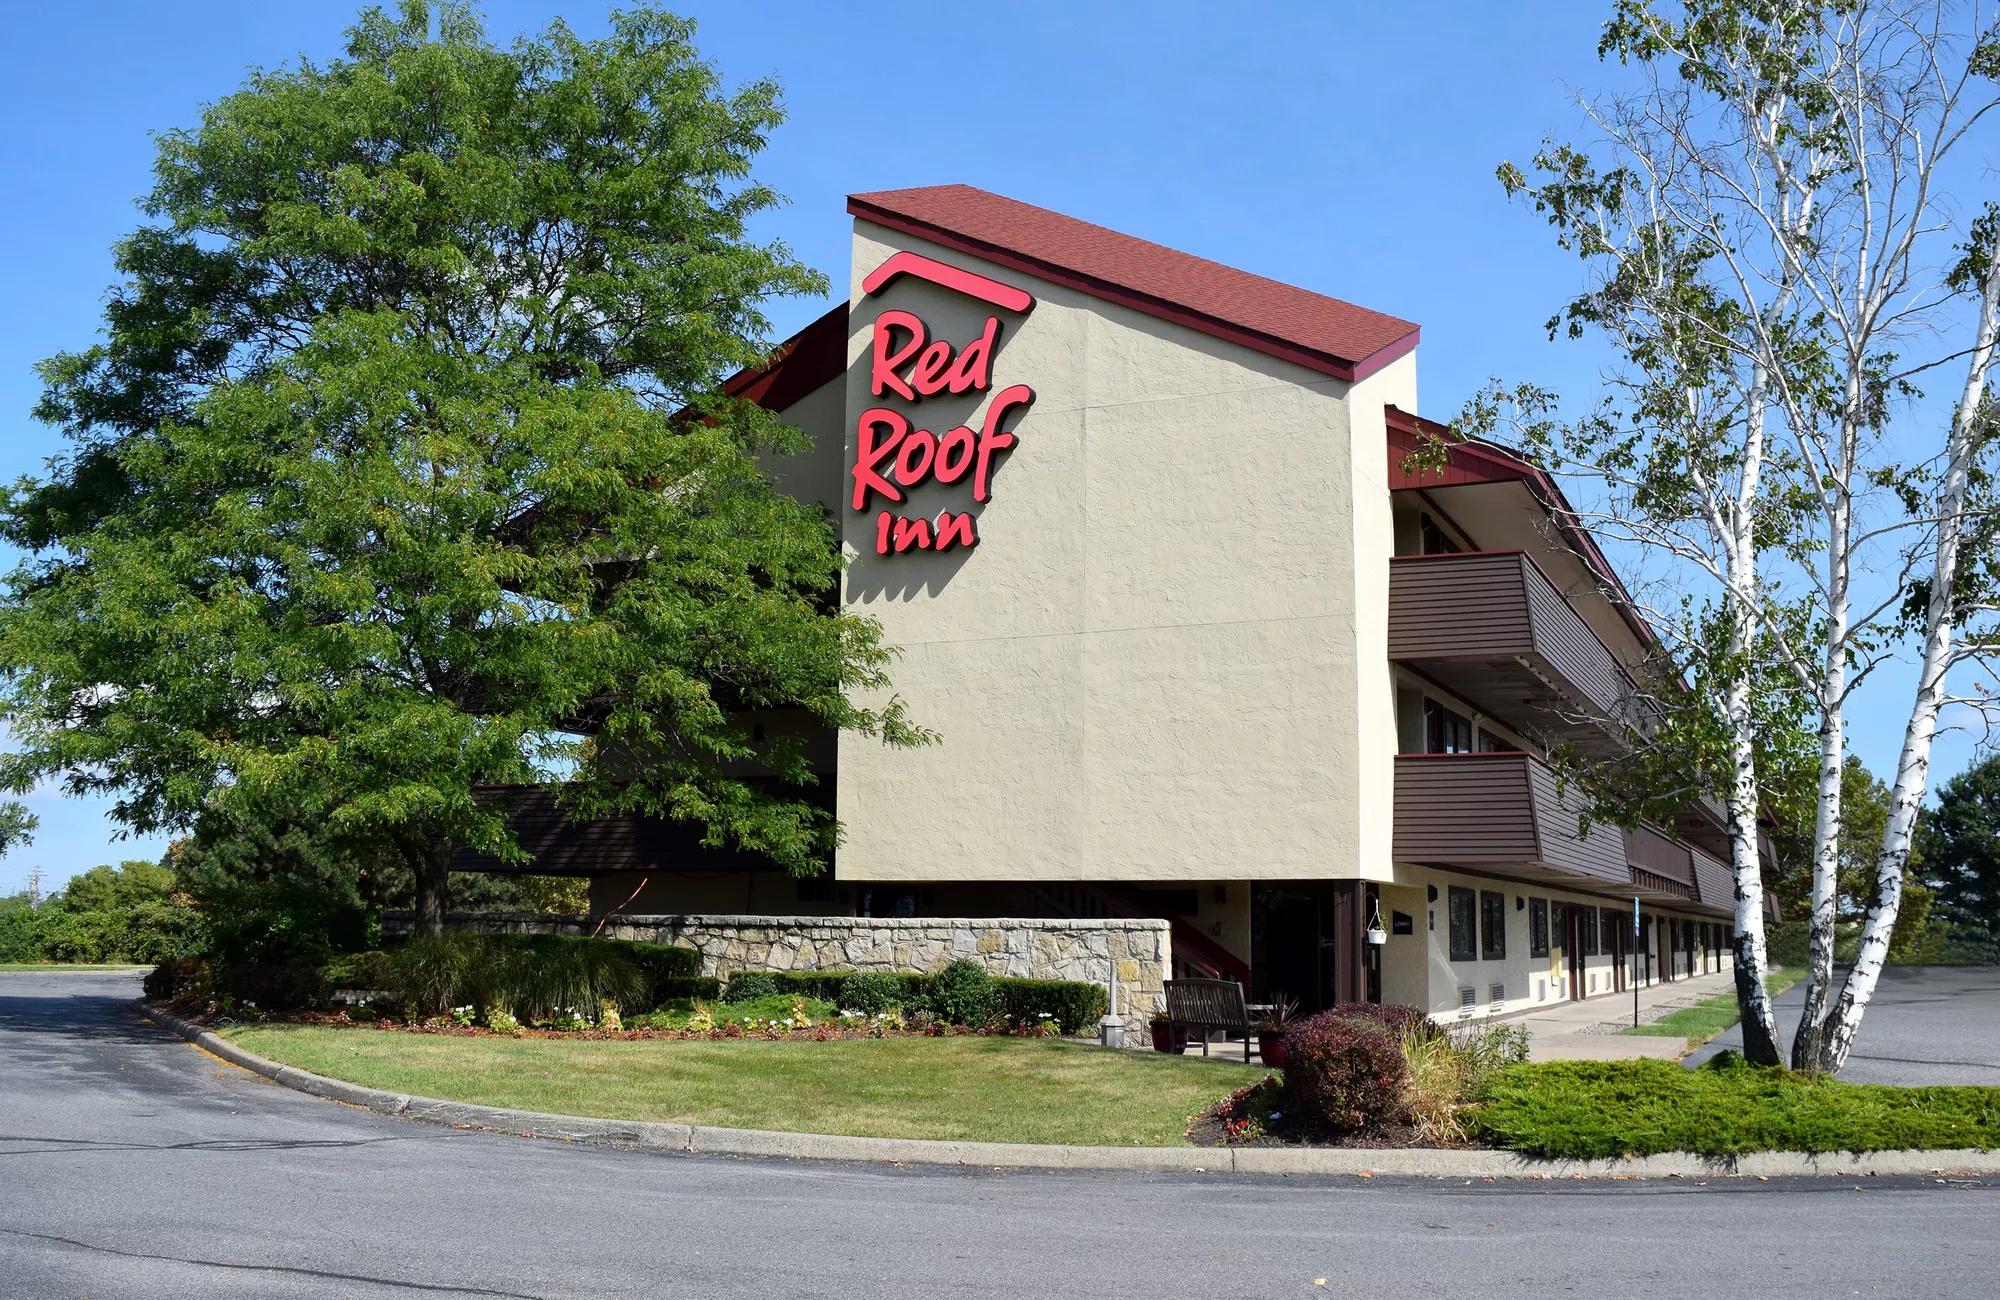 Red Roof Inn Syracuse Property Exterior Image Details